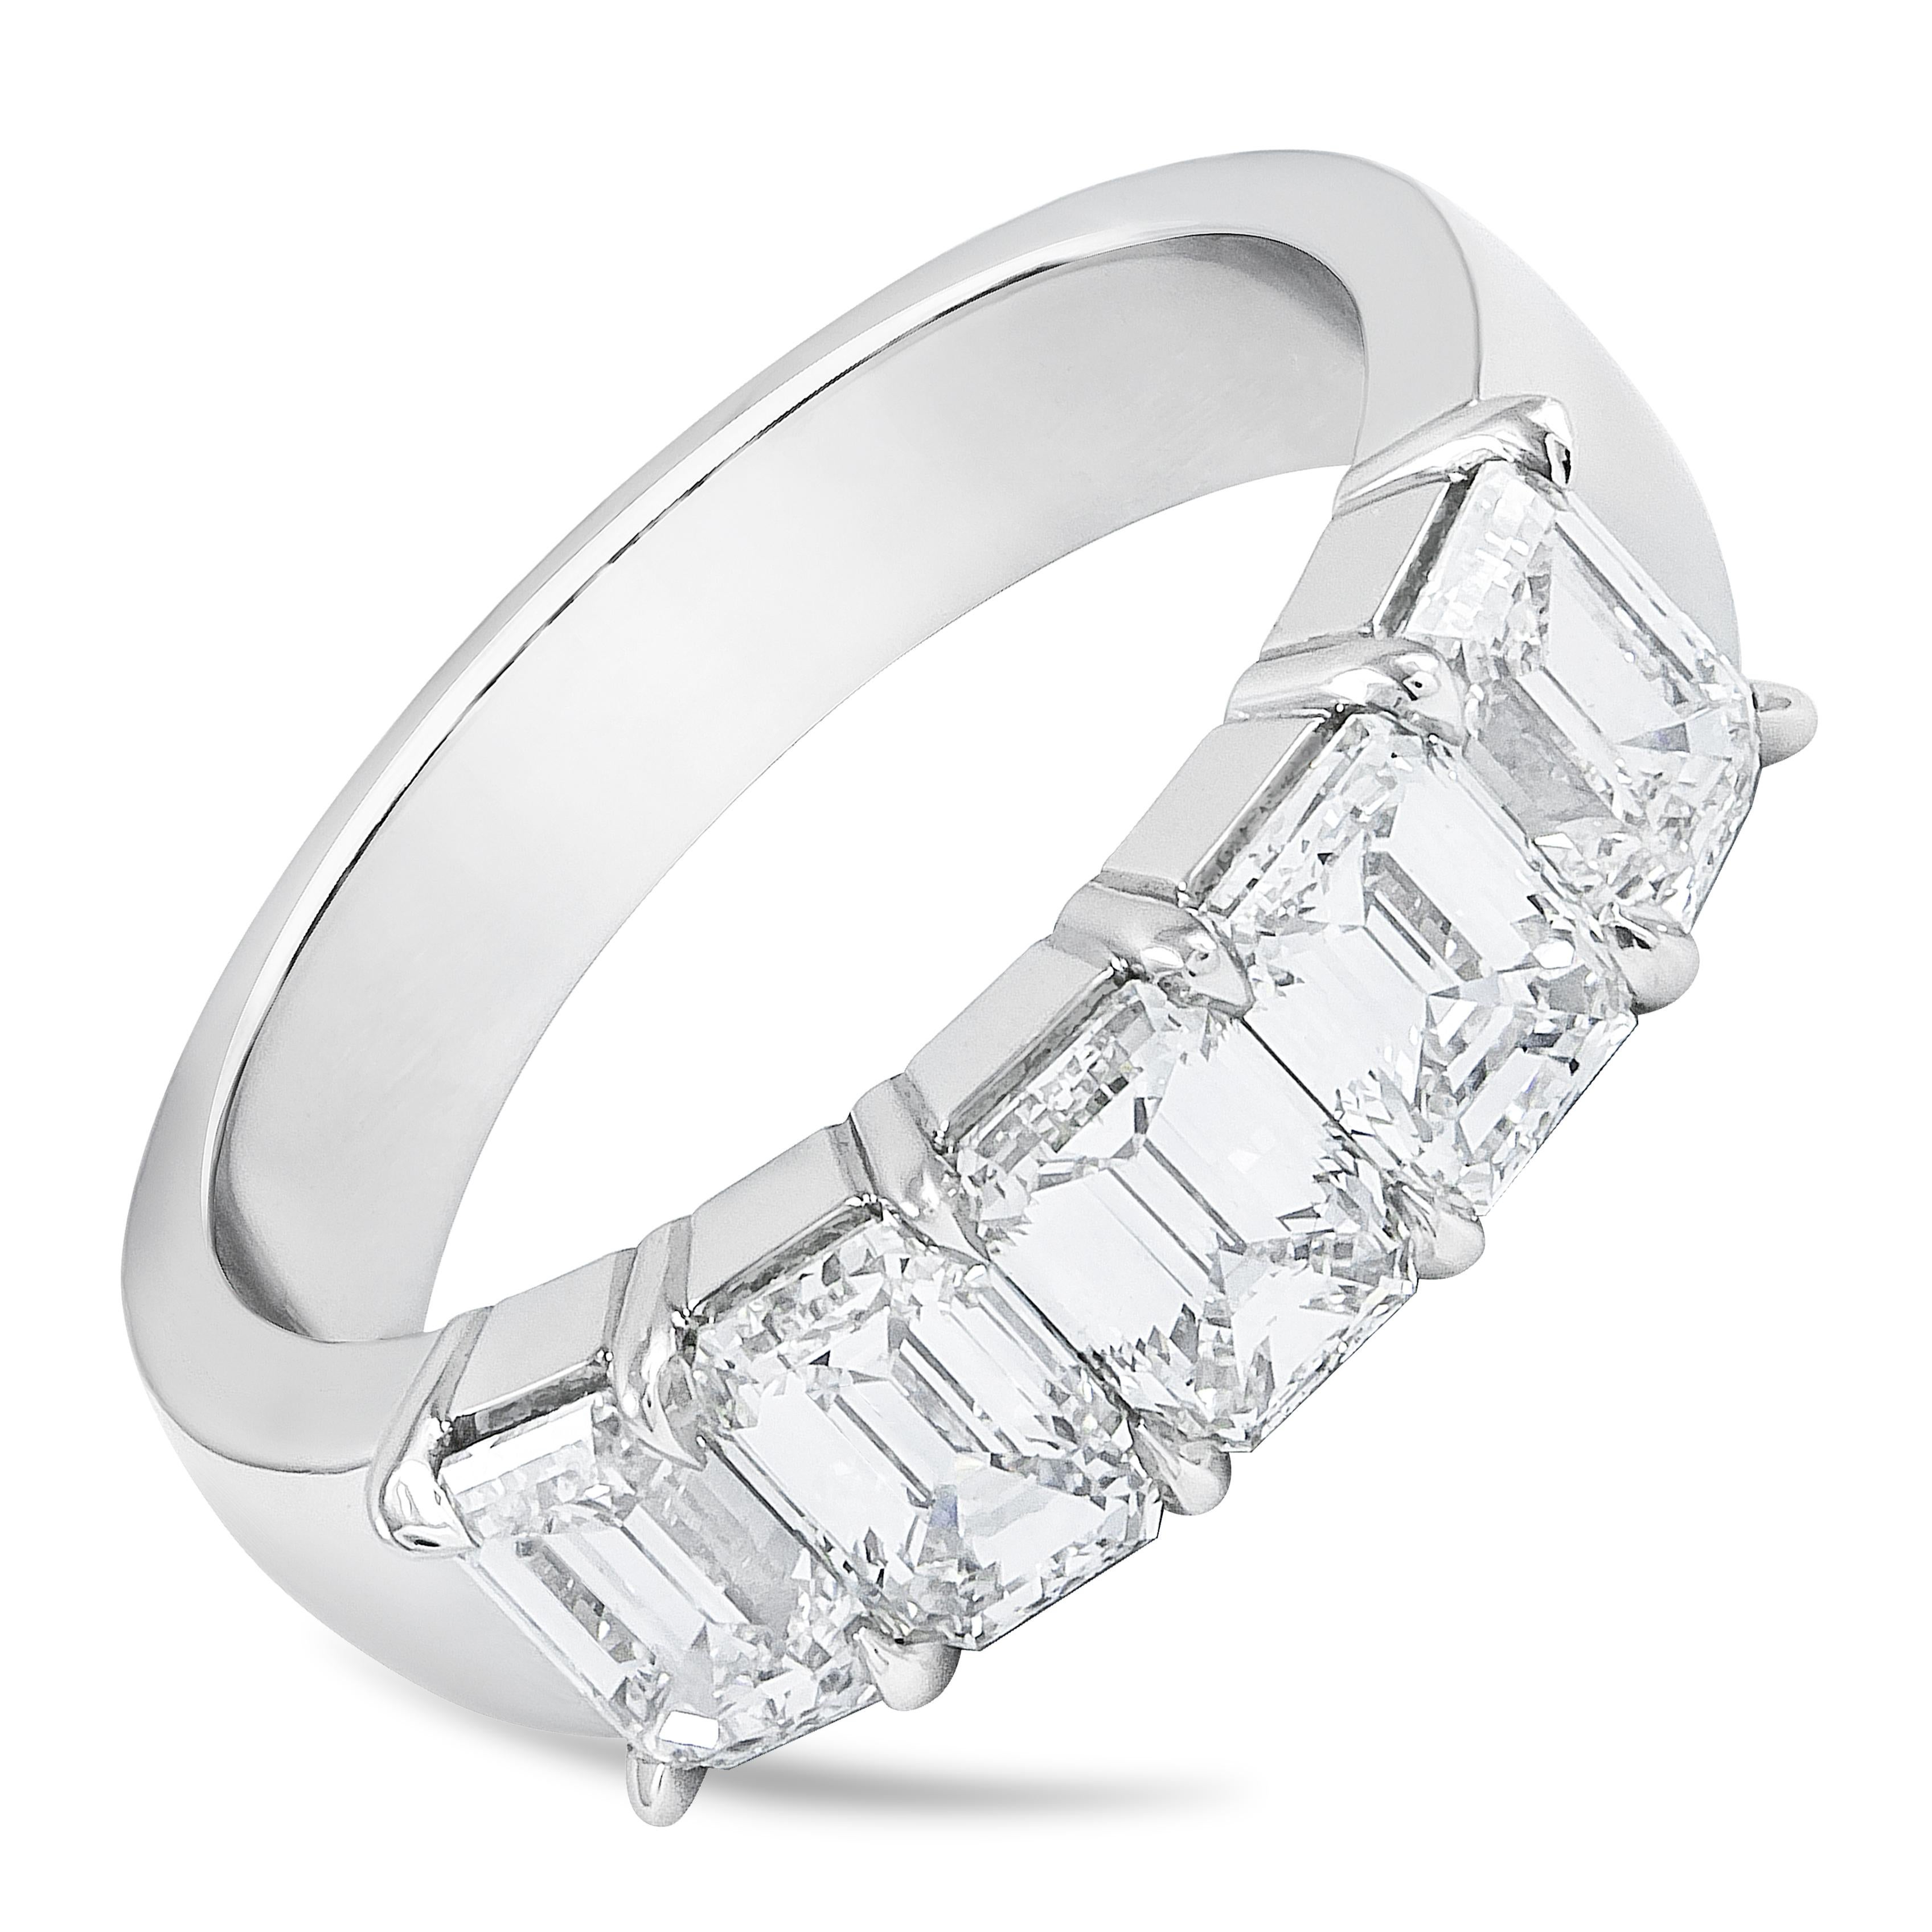 A classy and unique wedding band showcasing 5 perfectly matched emerald cut diamonds weighing 2.53 carats total, H color and VS in clarity, set in a timeless shared prong setting and Finely made in Platinum. Size 6.25 US resizable upon request and